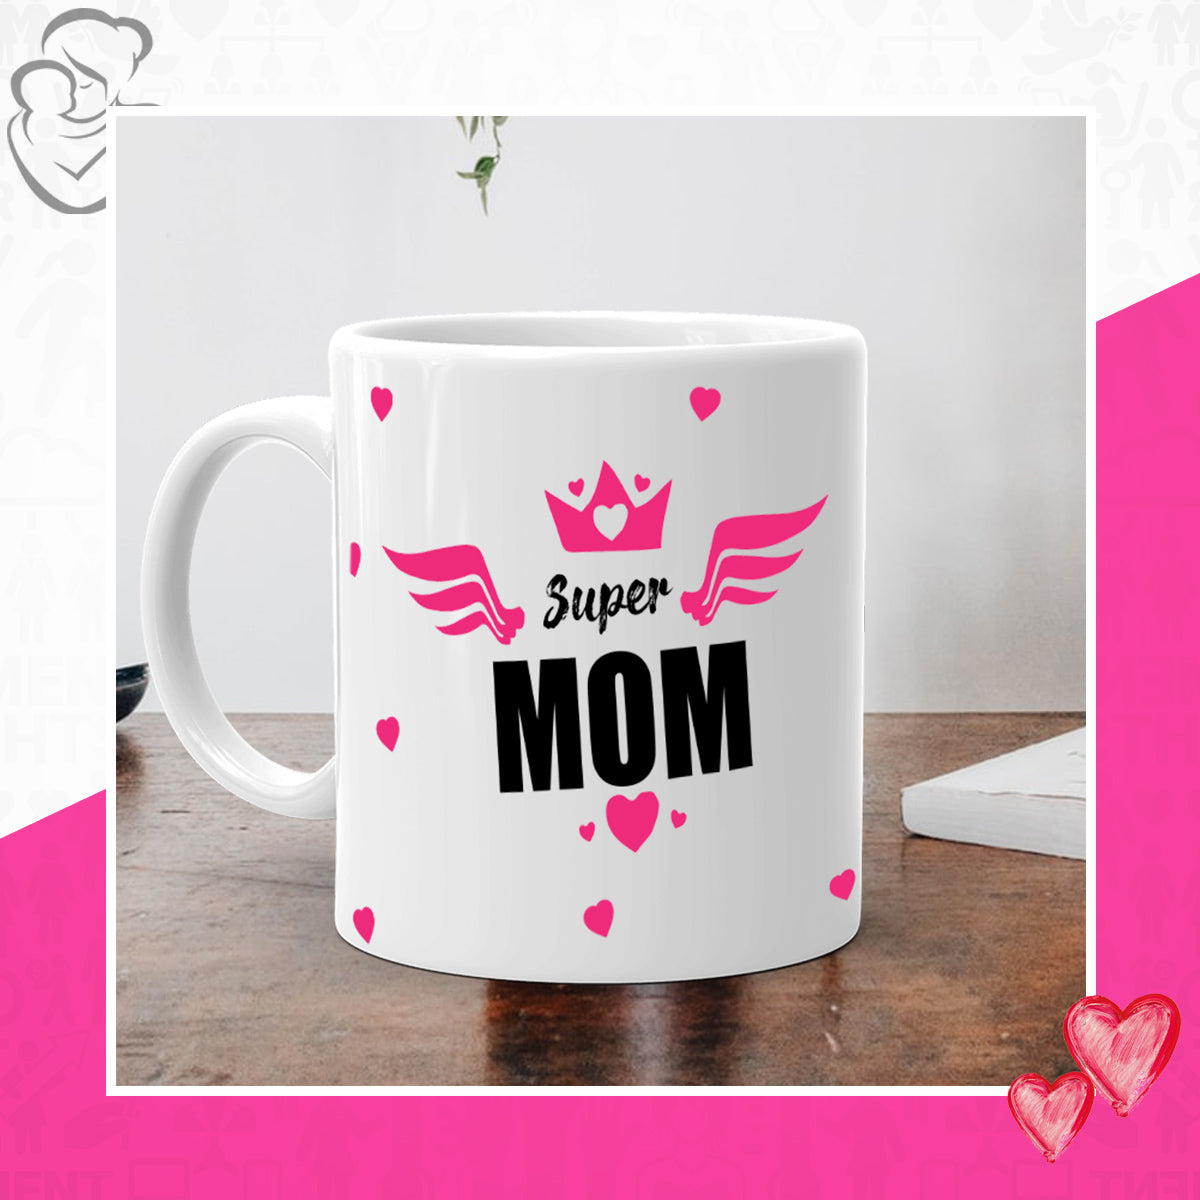 Send Mother's Day Combo Gifts to Kerala, Online Mother's Day Gift in Kerala  - ImgPile